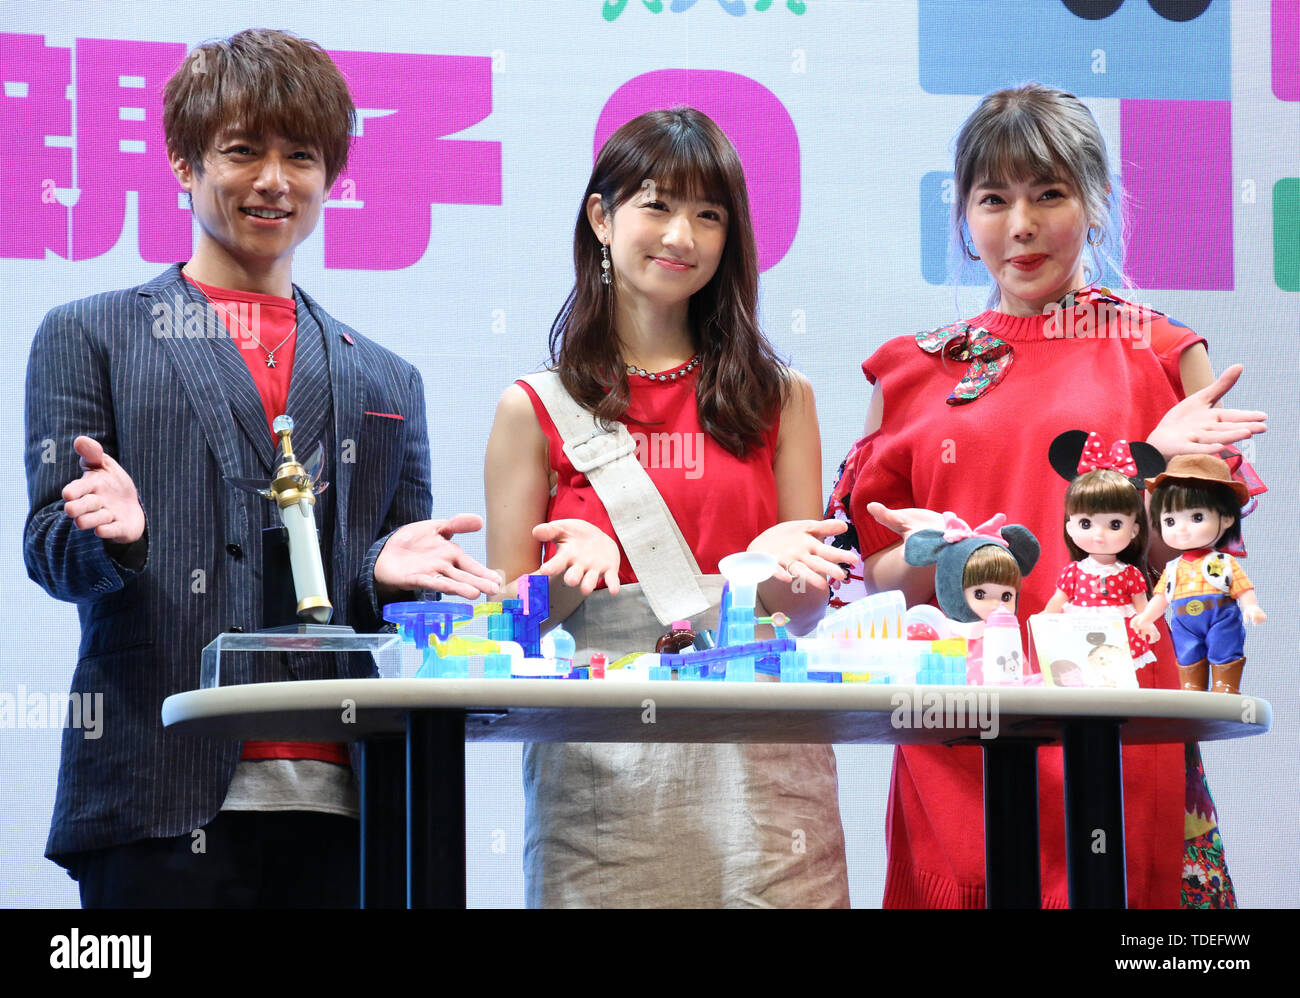 Tokyo, Japan. 14th June, 2019. (L-R) Japanese actor Taiyo Sugiura, TV personalities Yuko Ogura and Anna Sumitani pose for photo after their talk show at the annual International Tokyo Toy Show in Tokyo on Friday, June 14, 2019. Some 160,000 people are expecting to visit a four-day toy trade show which displays 35,000 latest toys from 40 countries. Credit: Yoshio Tsunoda/AFLO/Alamy Live News Stock Photo